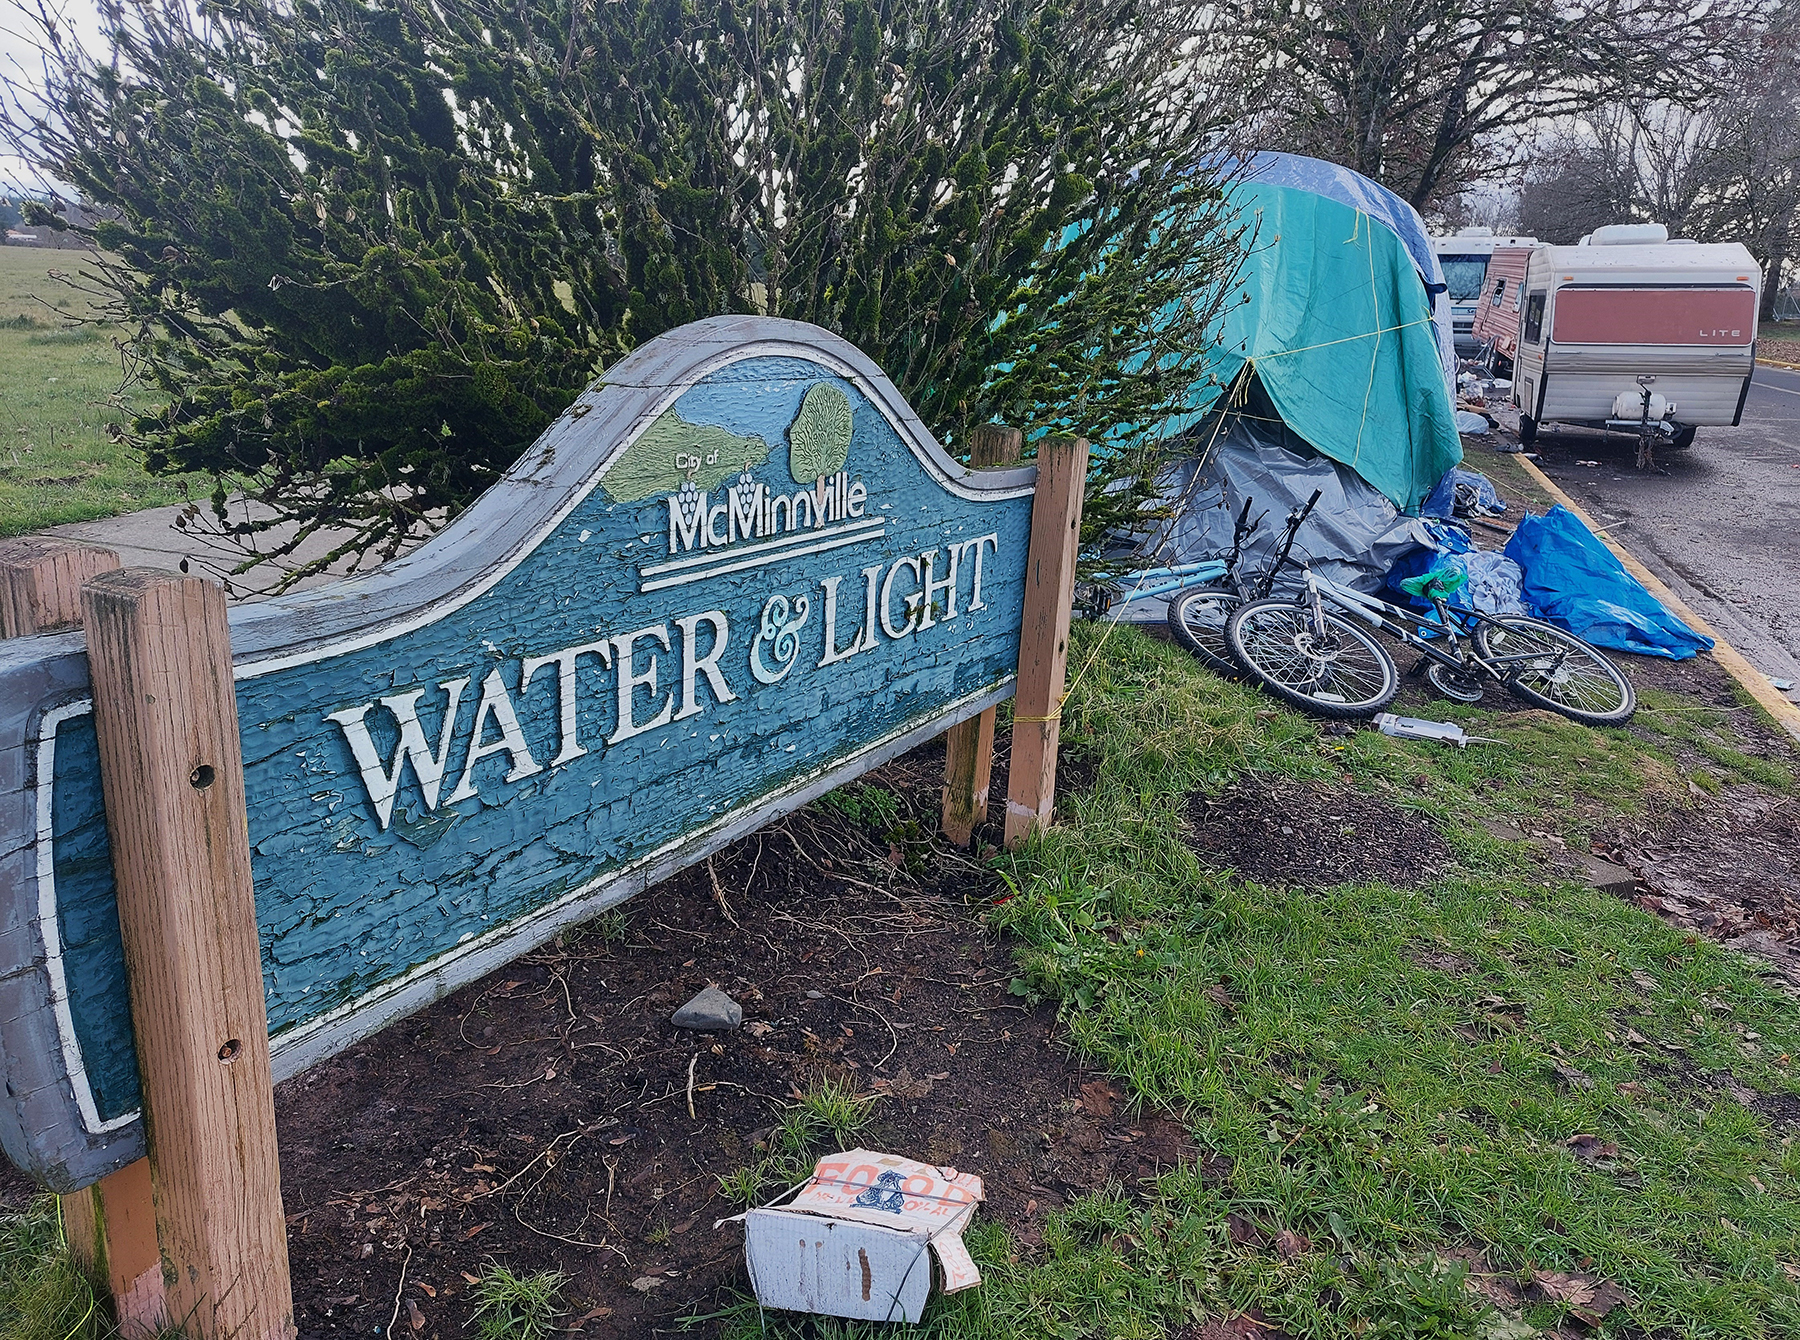 A wooden sign says "McMinnville water & light" is placed in grass next to some tents and a parked RV.